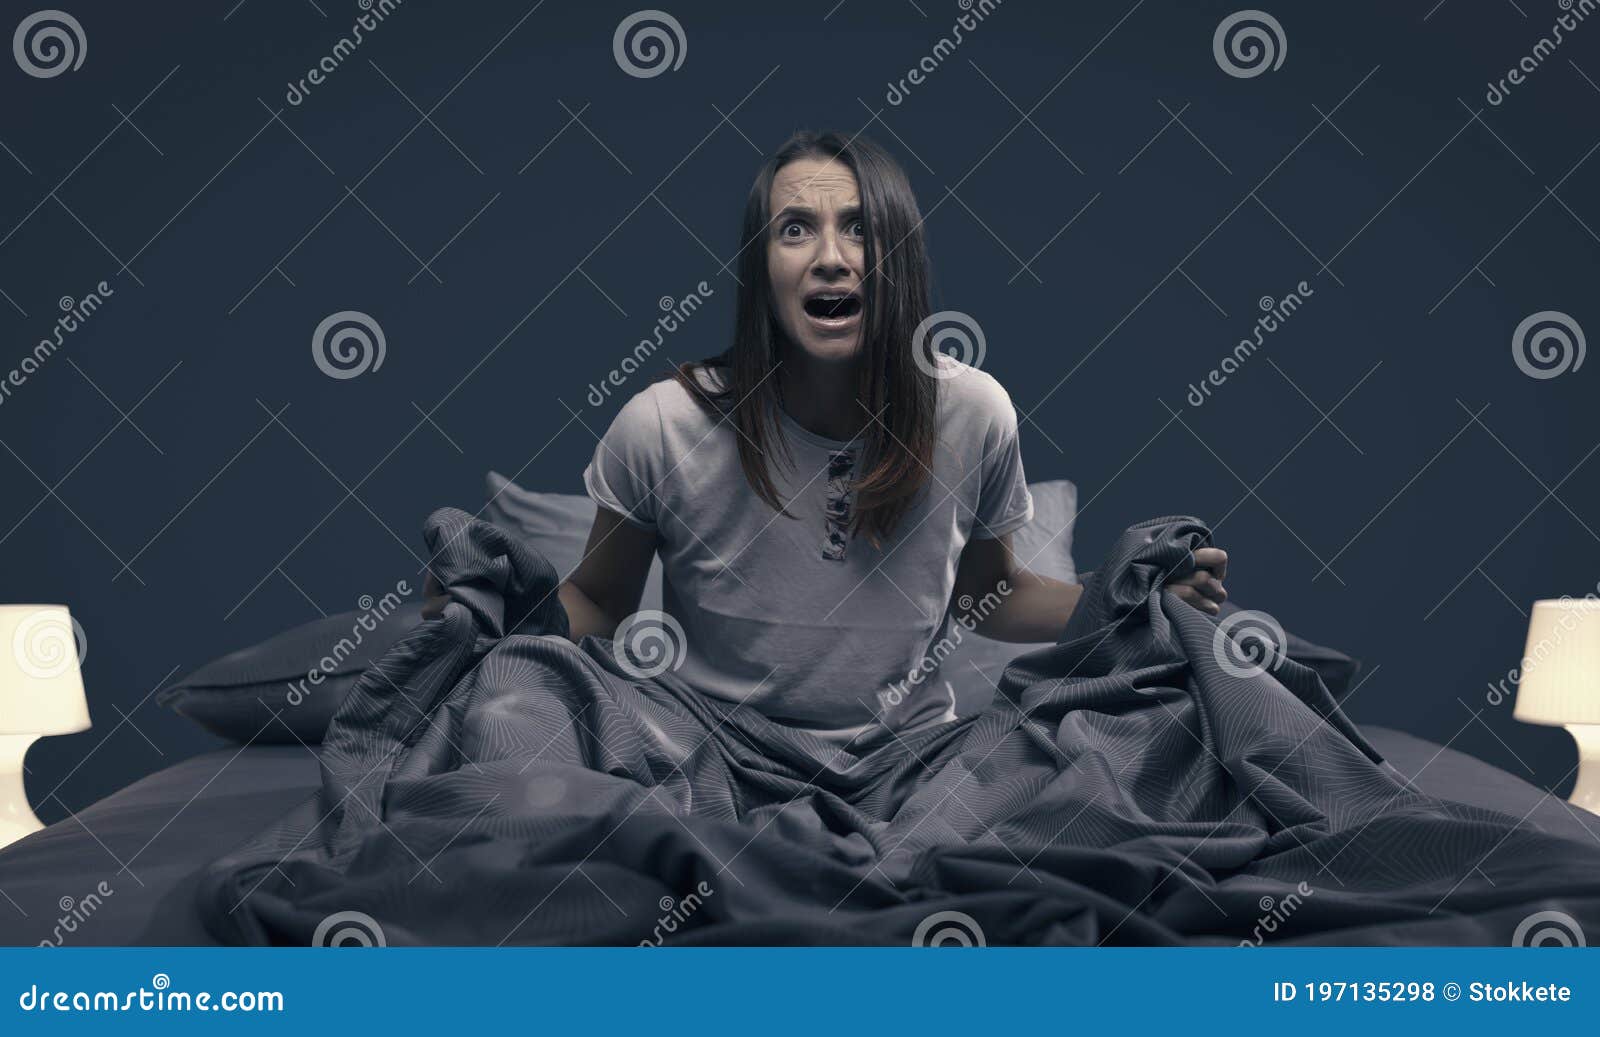 shocked woman waking up from a nightmare